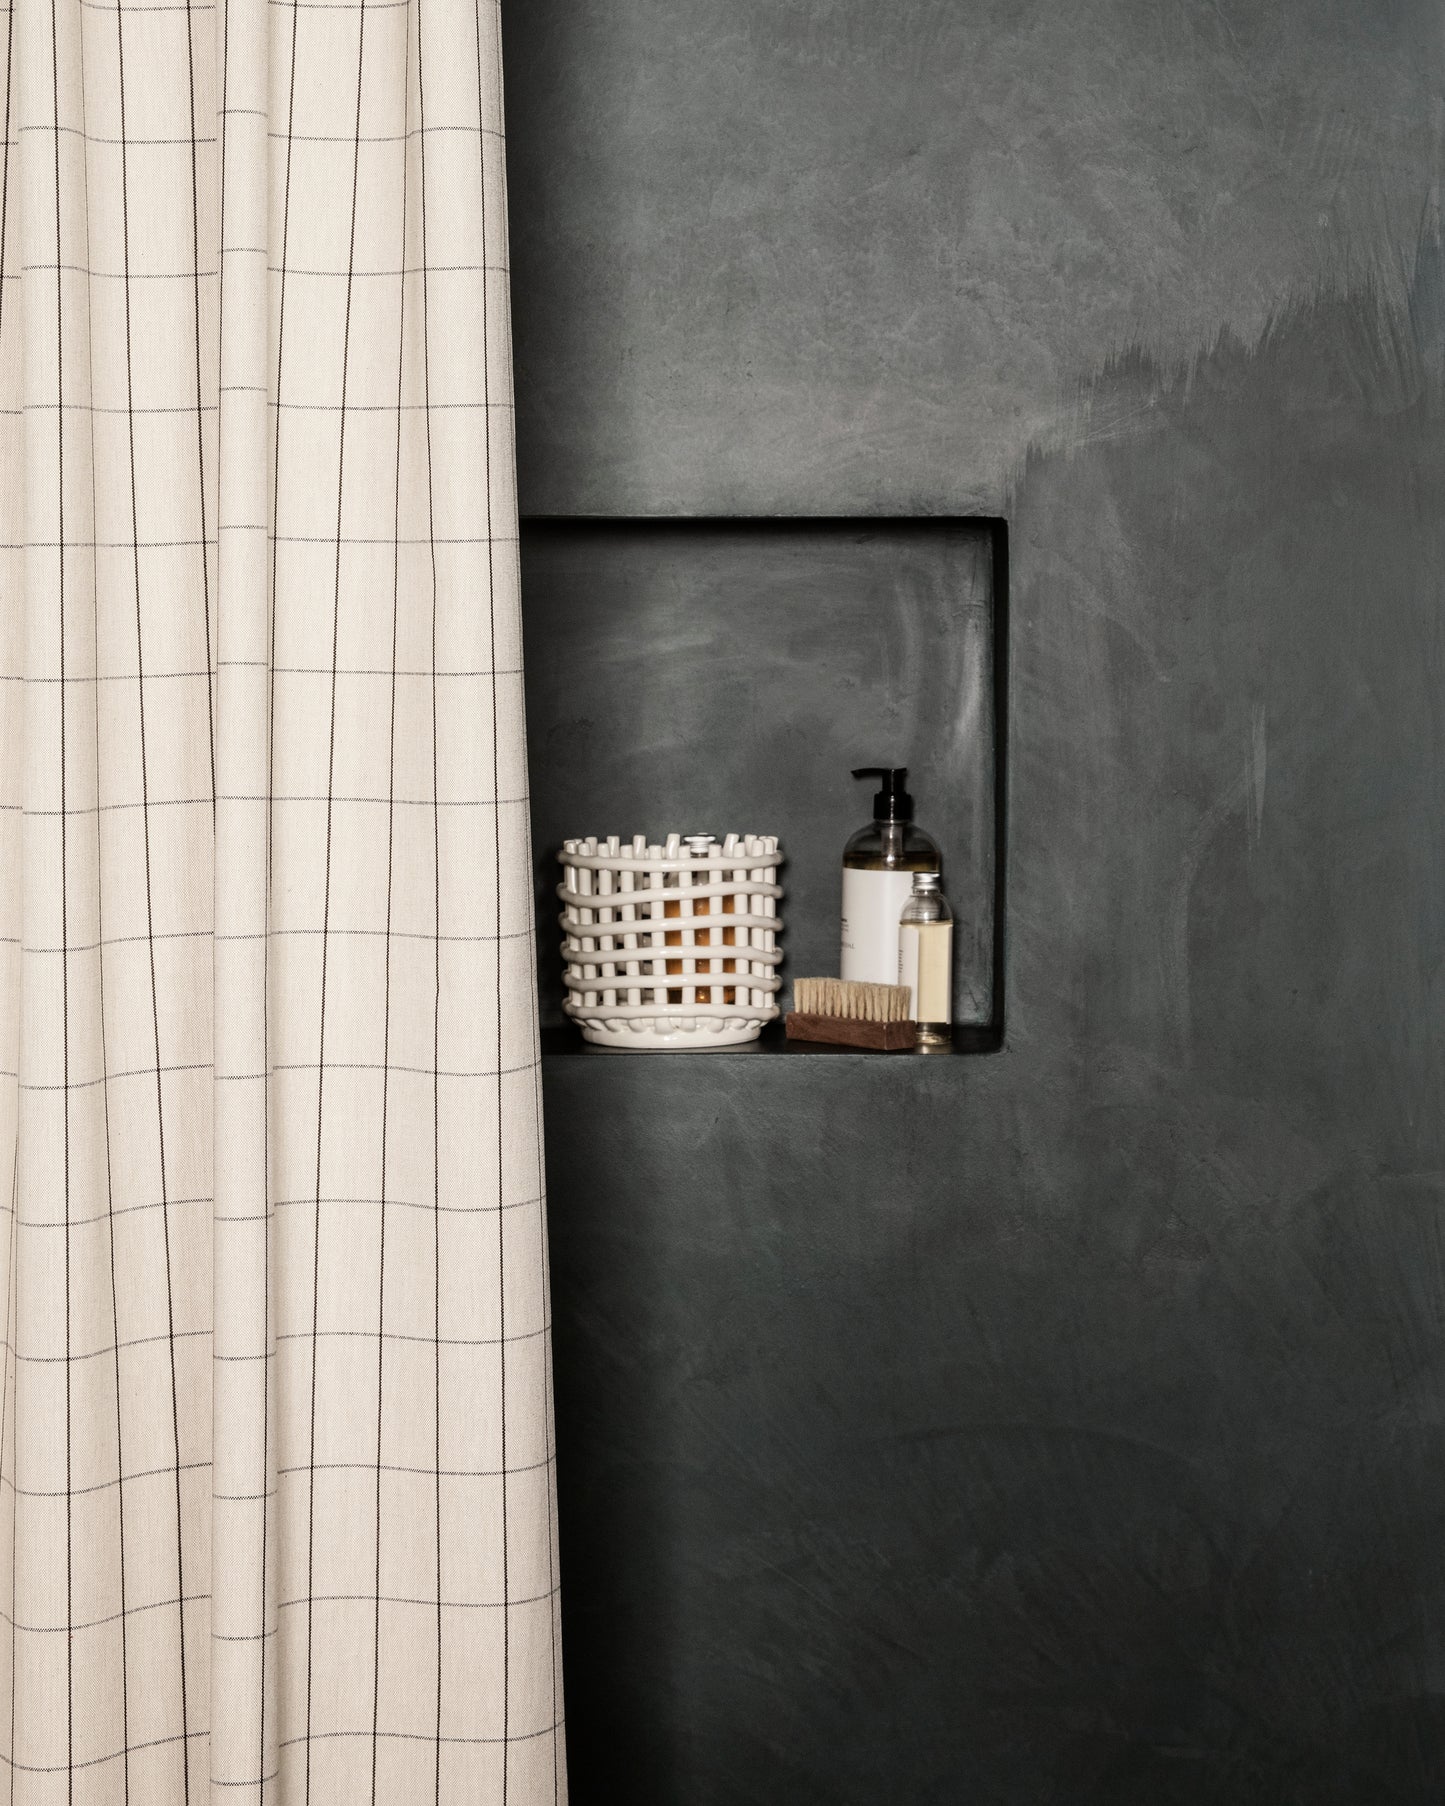 Ceramic Basket - Small by ferm LIVING